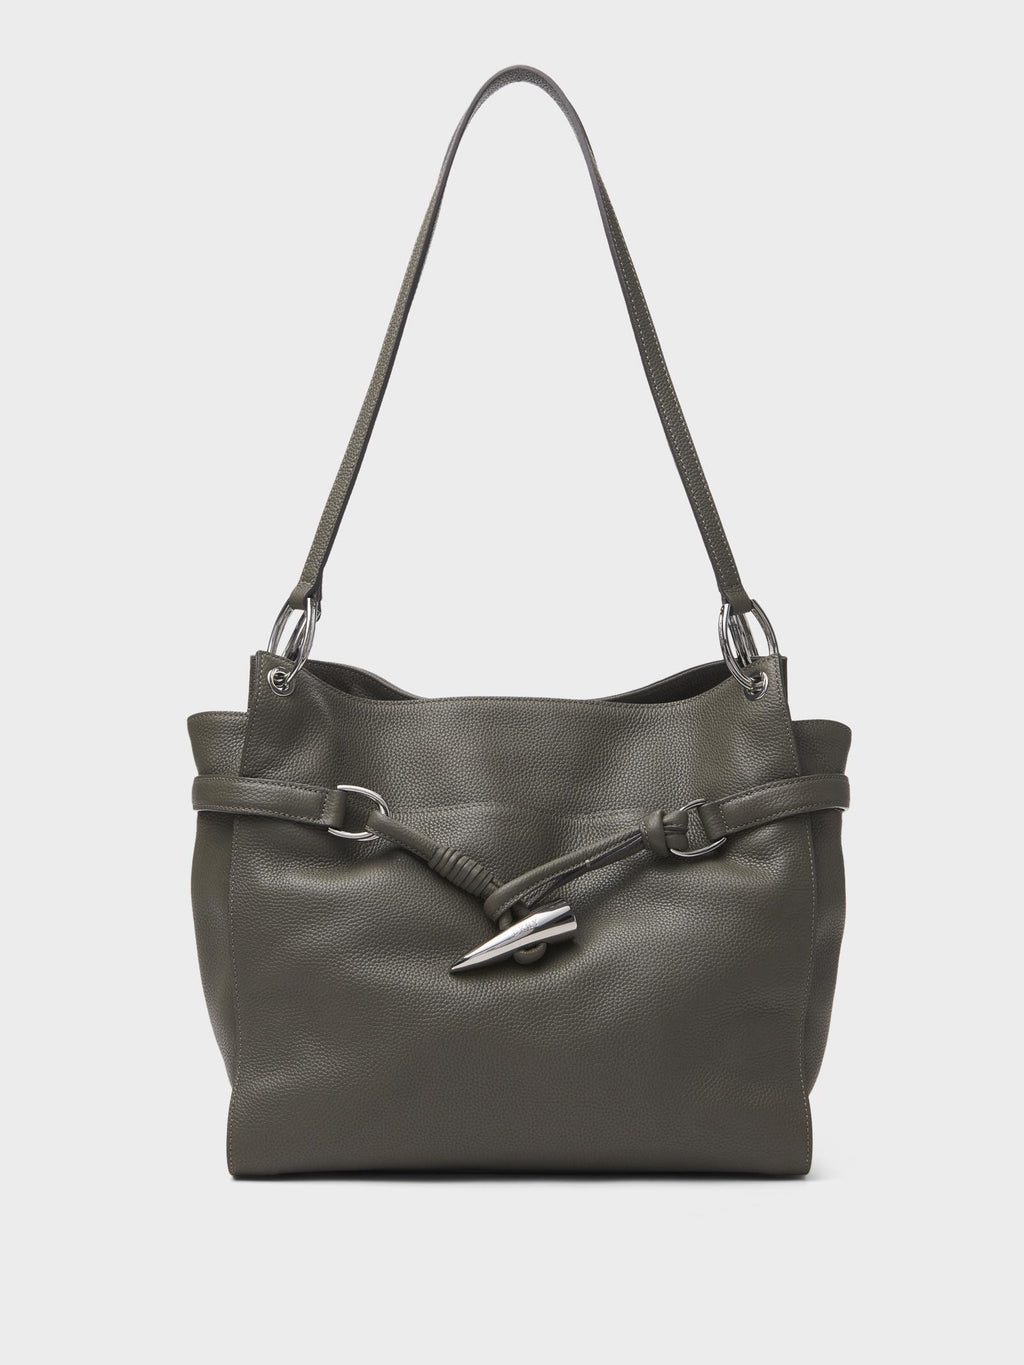 DKNY Cindy EastWest Large Tote Grey